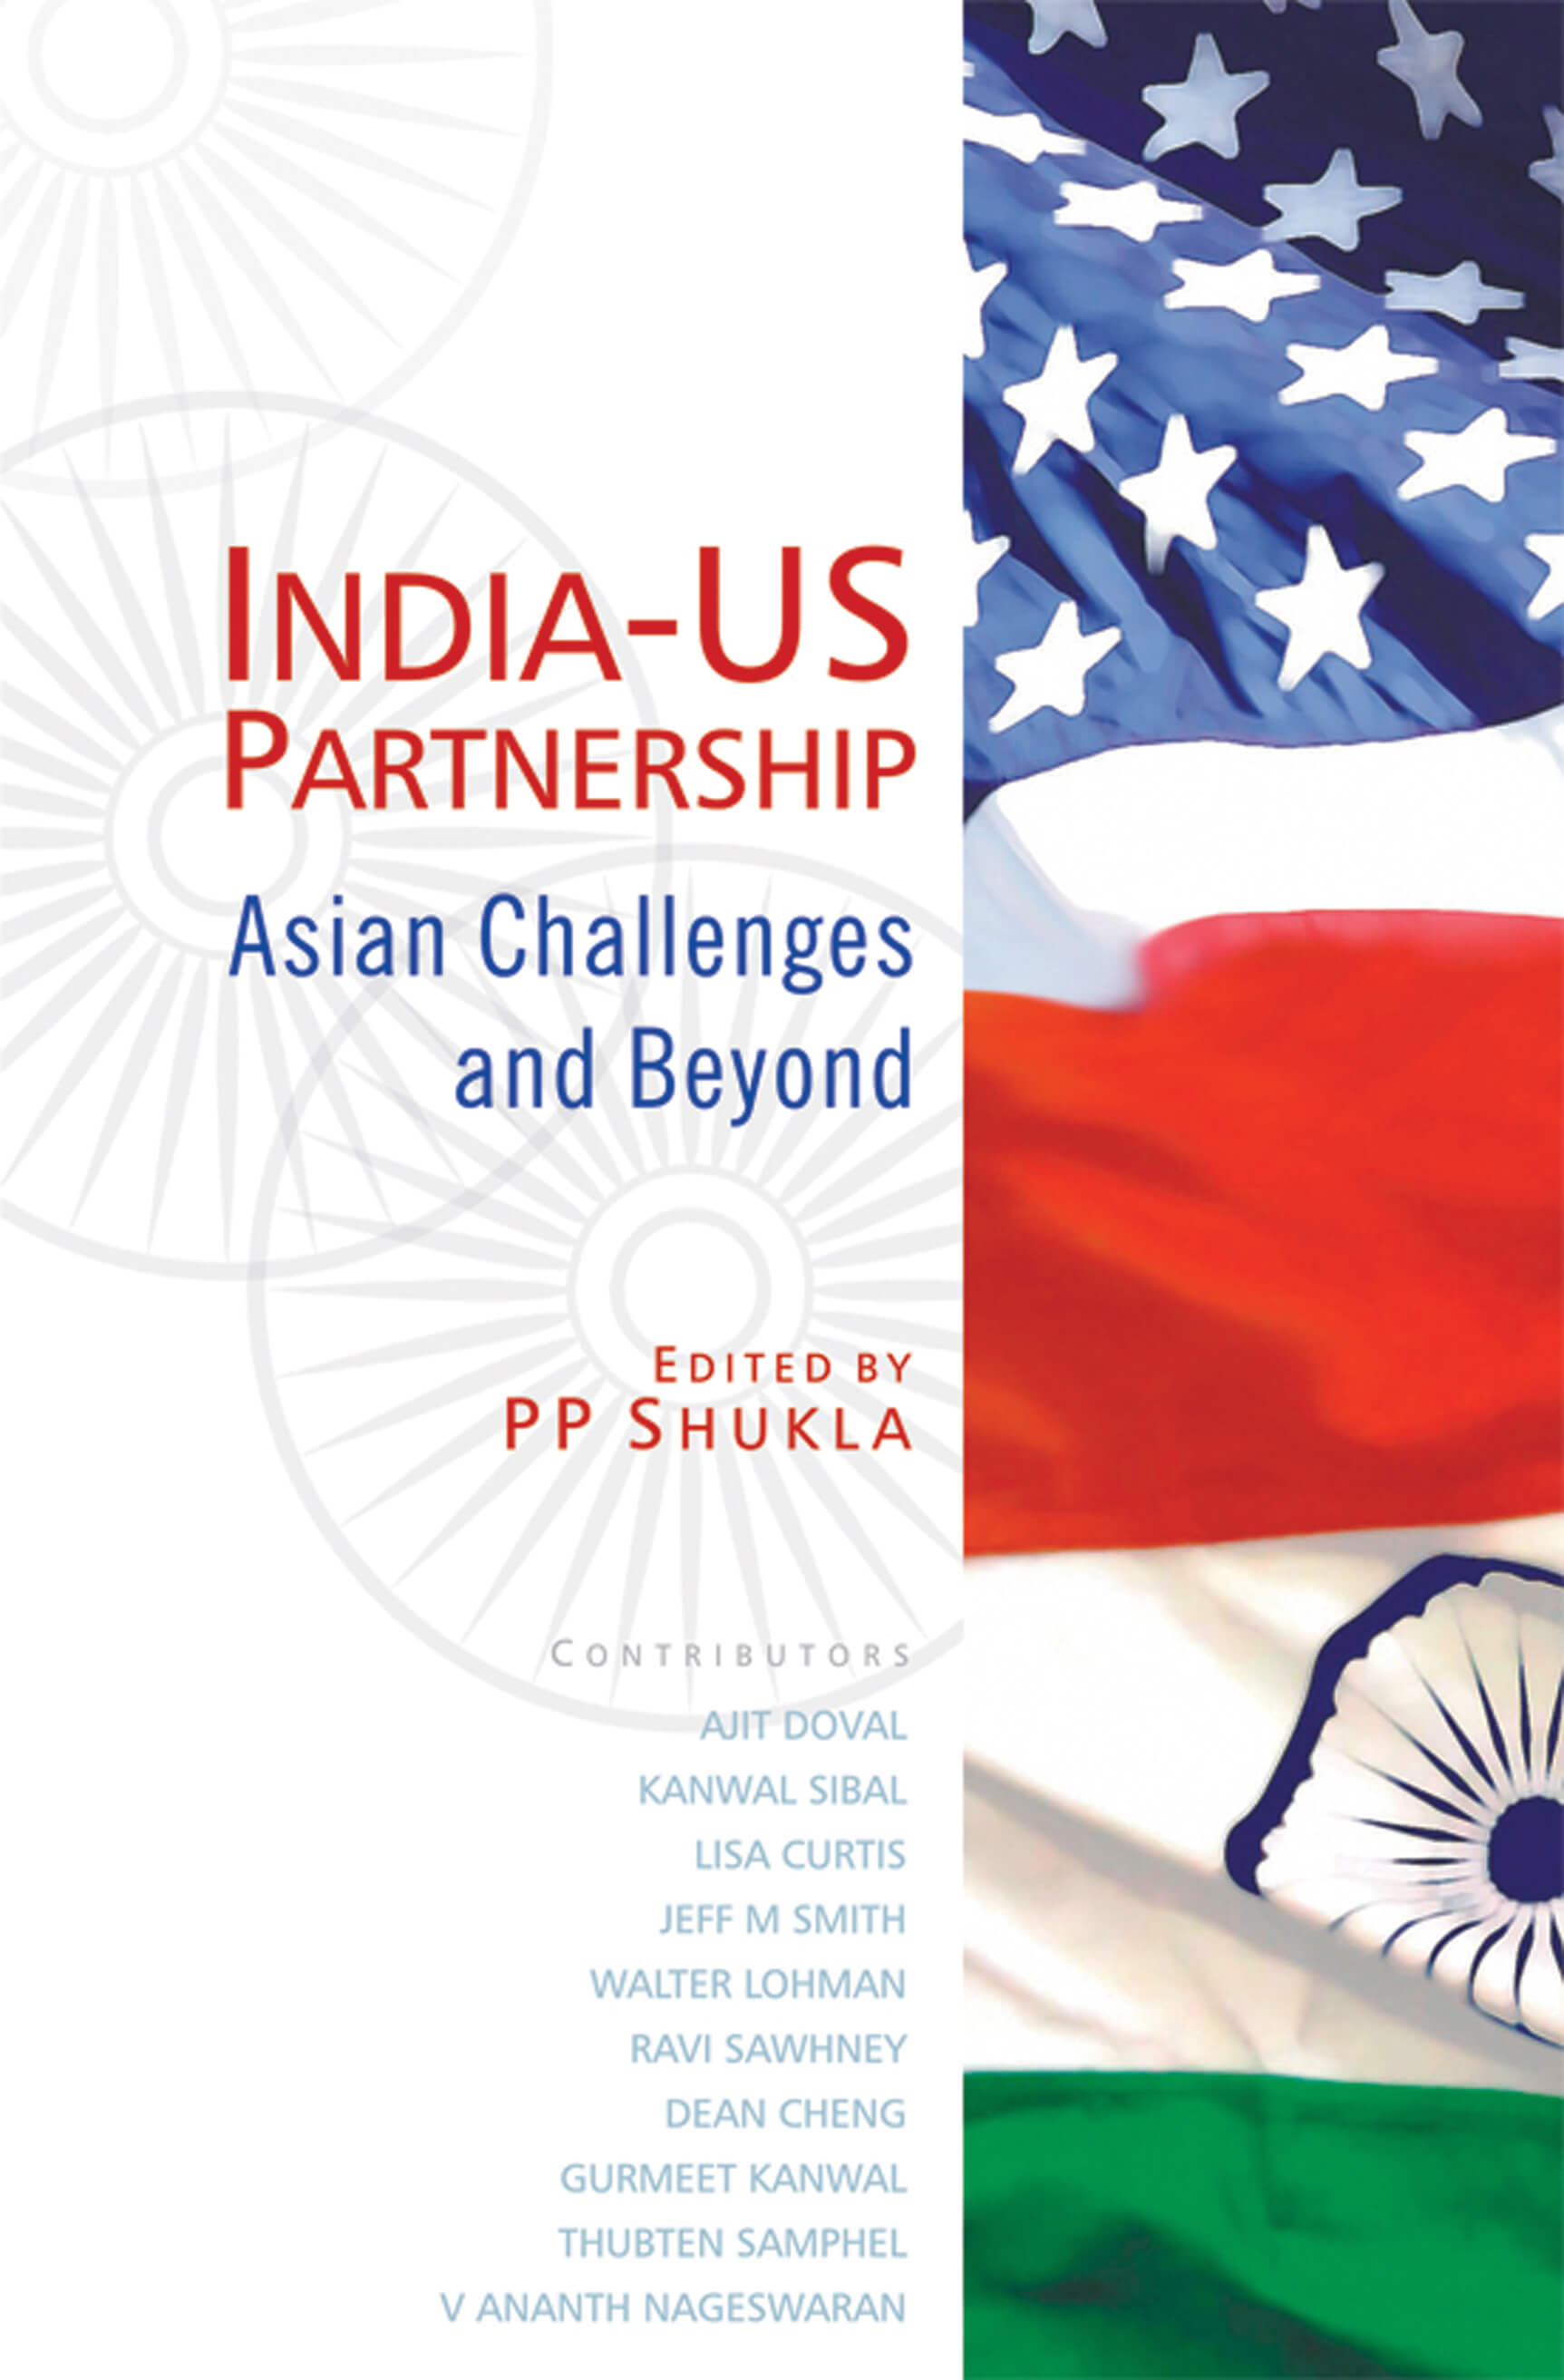 India-US Partnership: Asian Challenges and Beyond